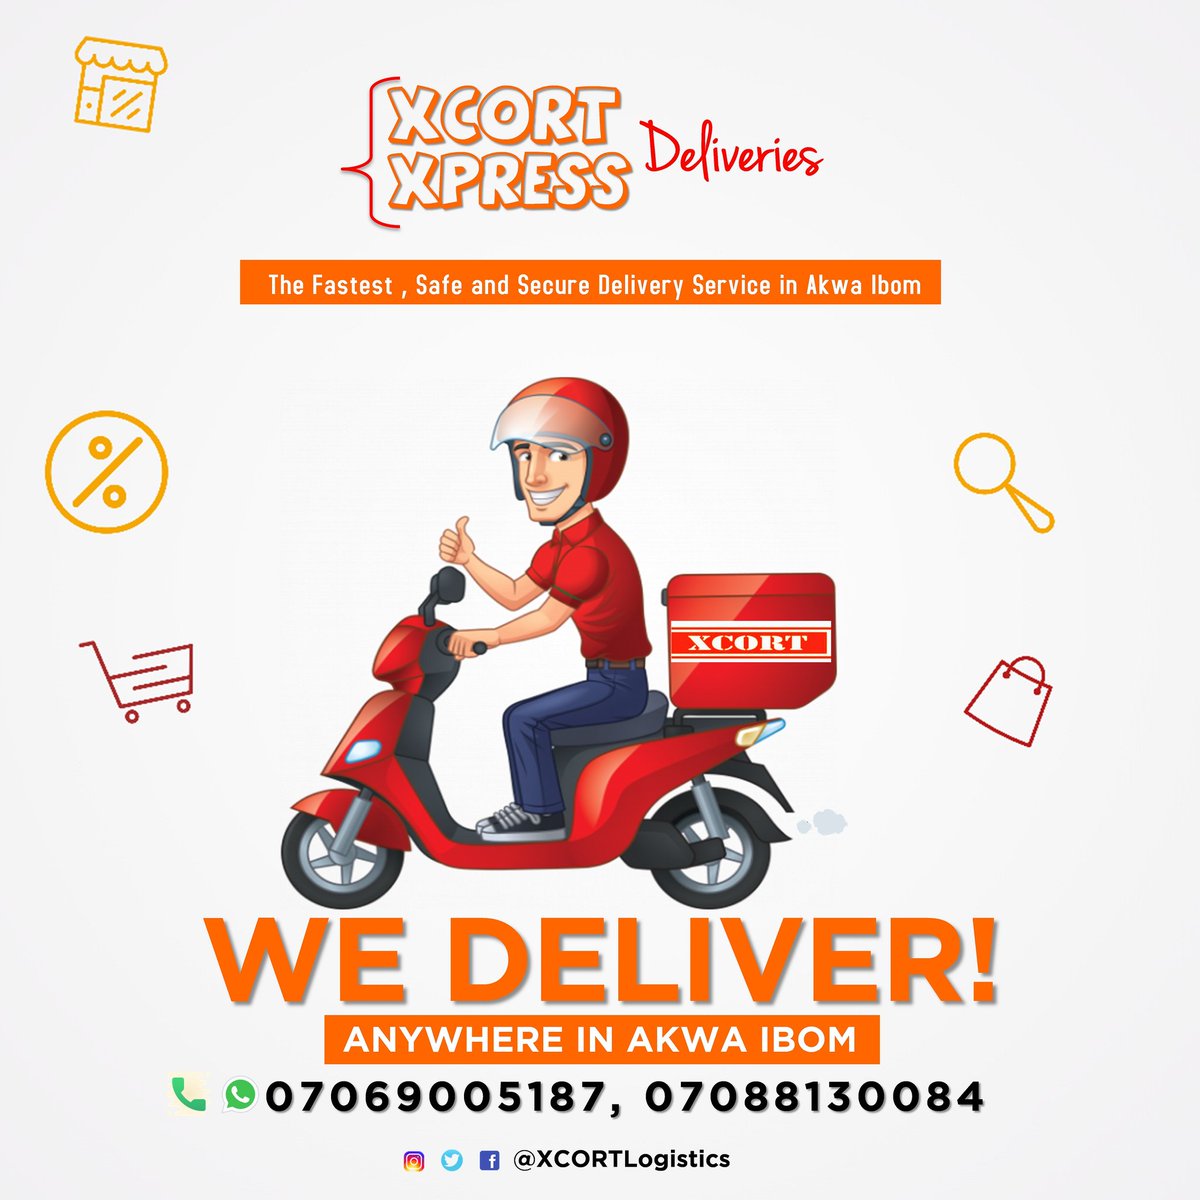 .@WetinDeyNet thanks for following. Lest handle your delivery anywhere in Akwa Ibom THE FASTEST WAY! ❤❤💯 #XcortXpressDeliveries #AkwaIbomTwitter